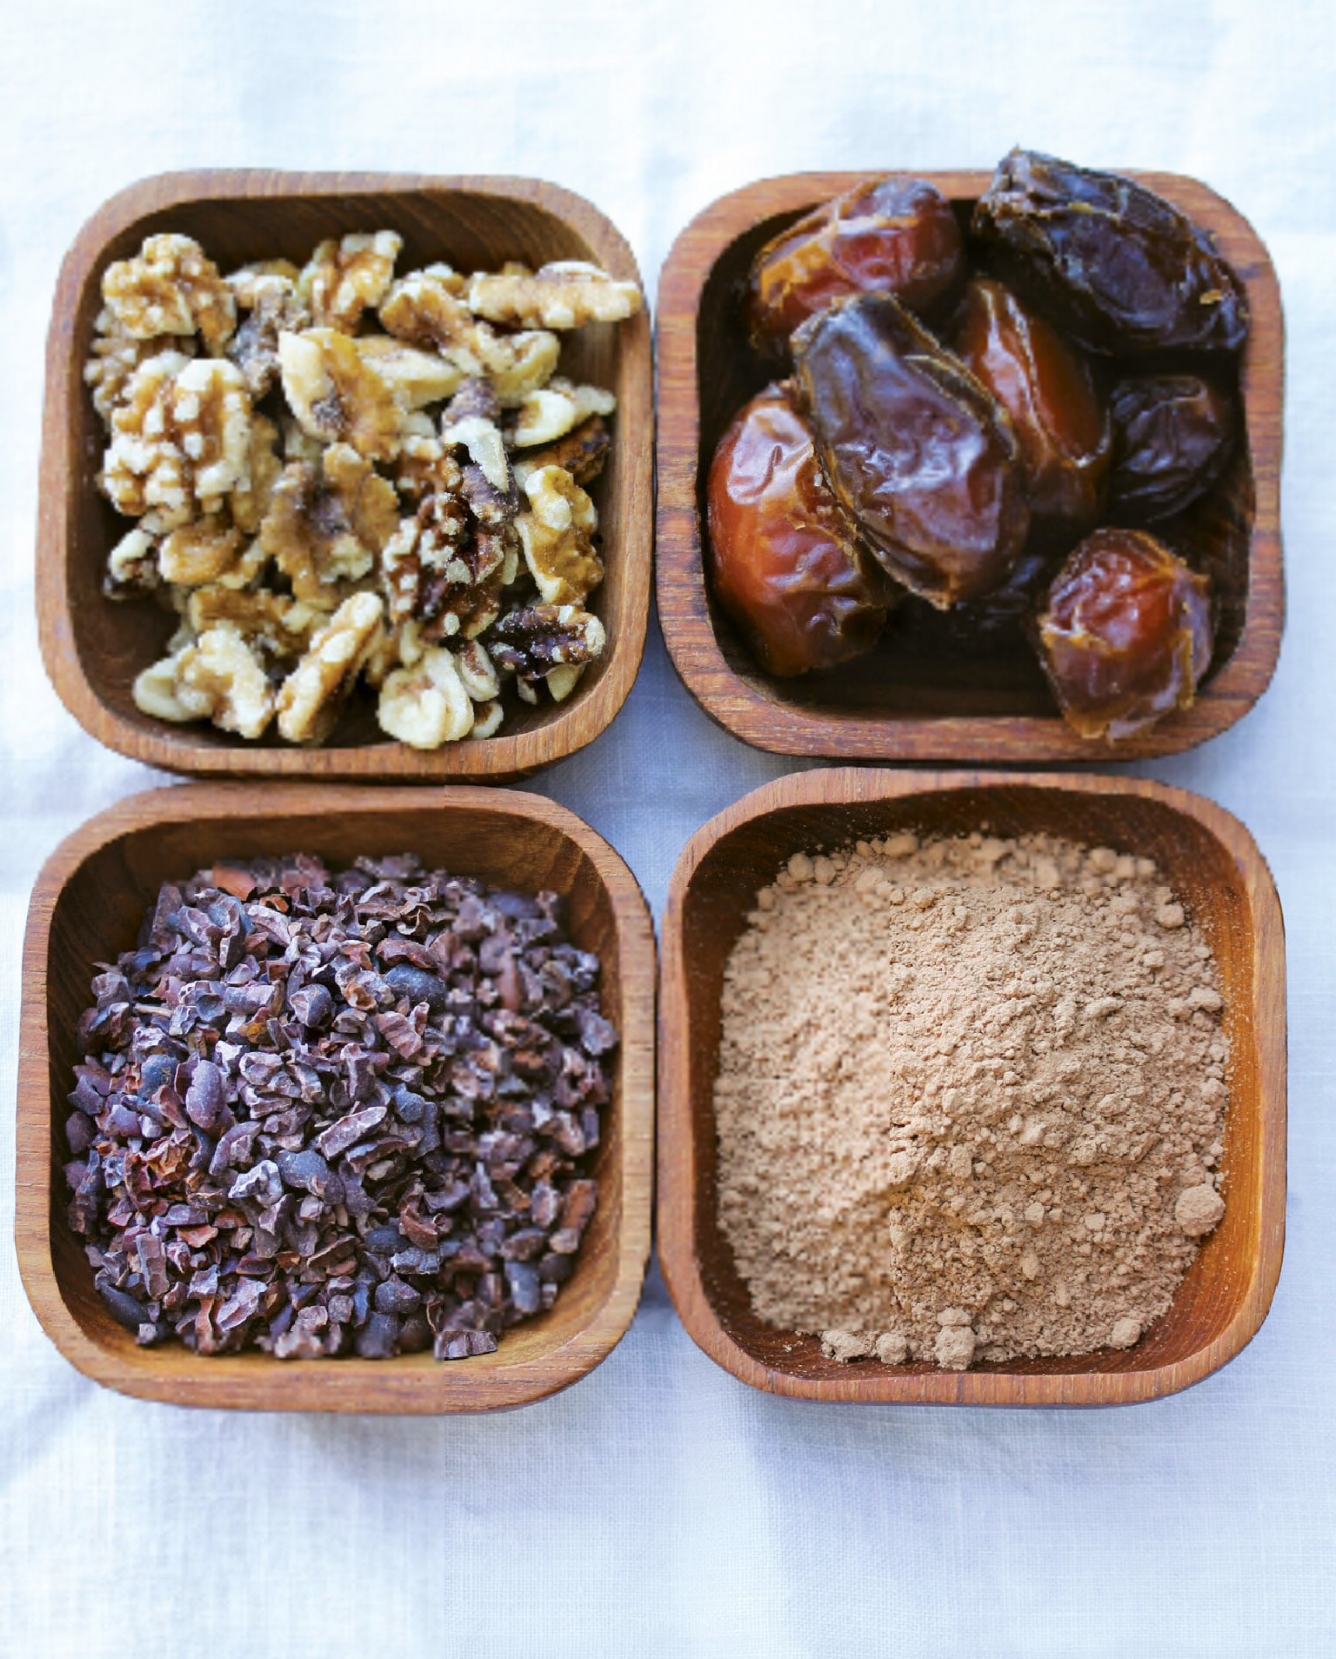 Recipe + Photo via Navitas Naturals, adapted from Superfood Kitchens